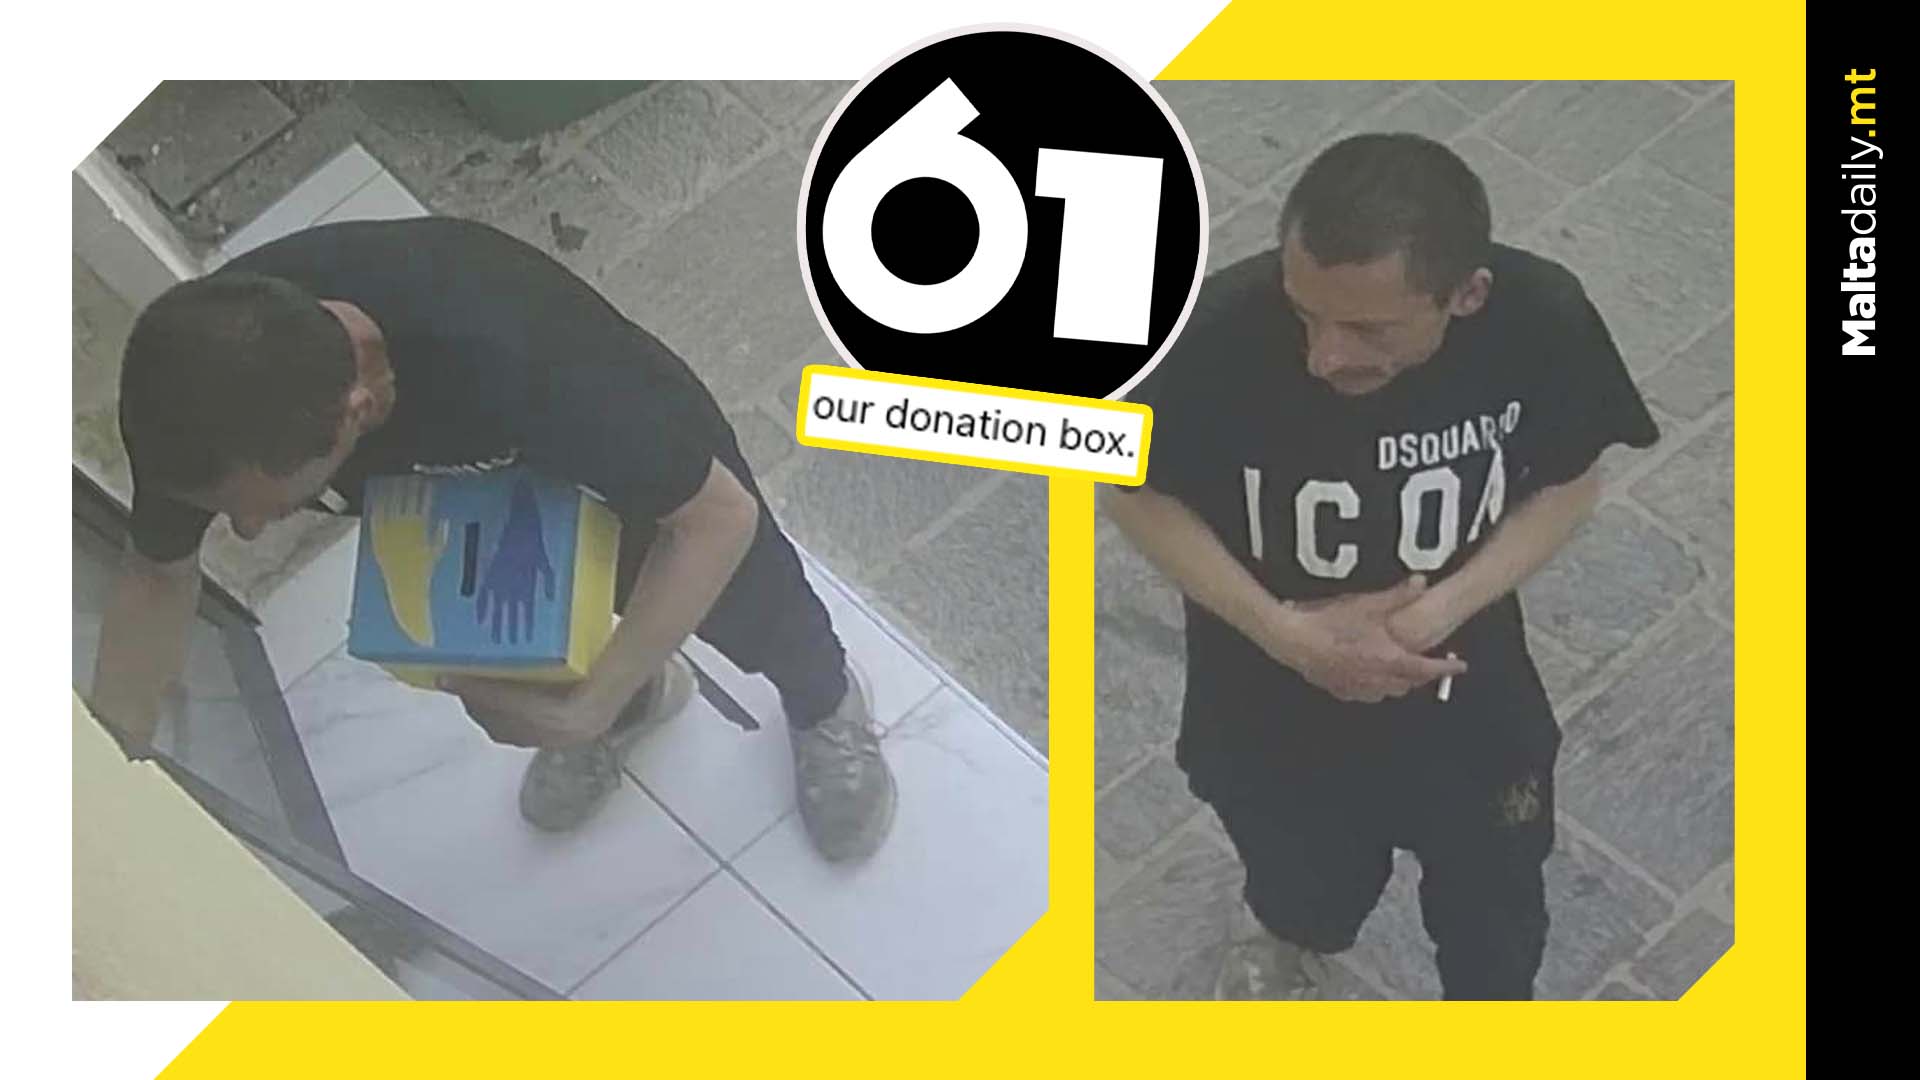 Man arrested for stealing Lot 61 donation box